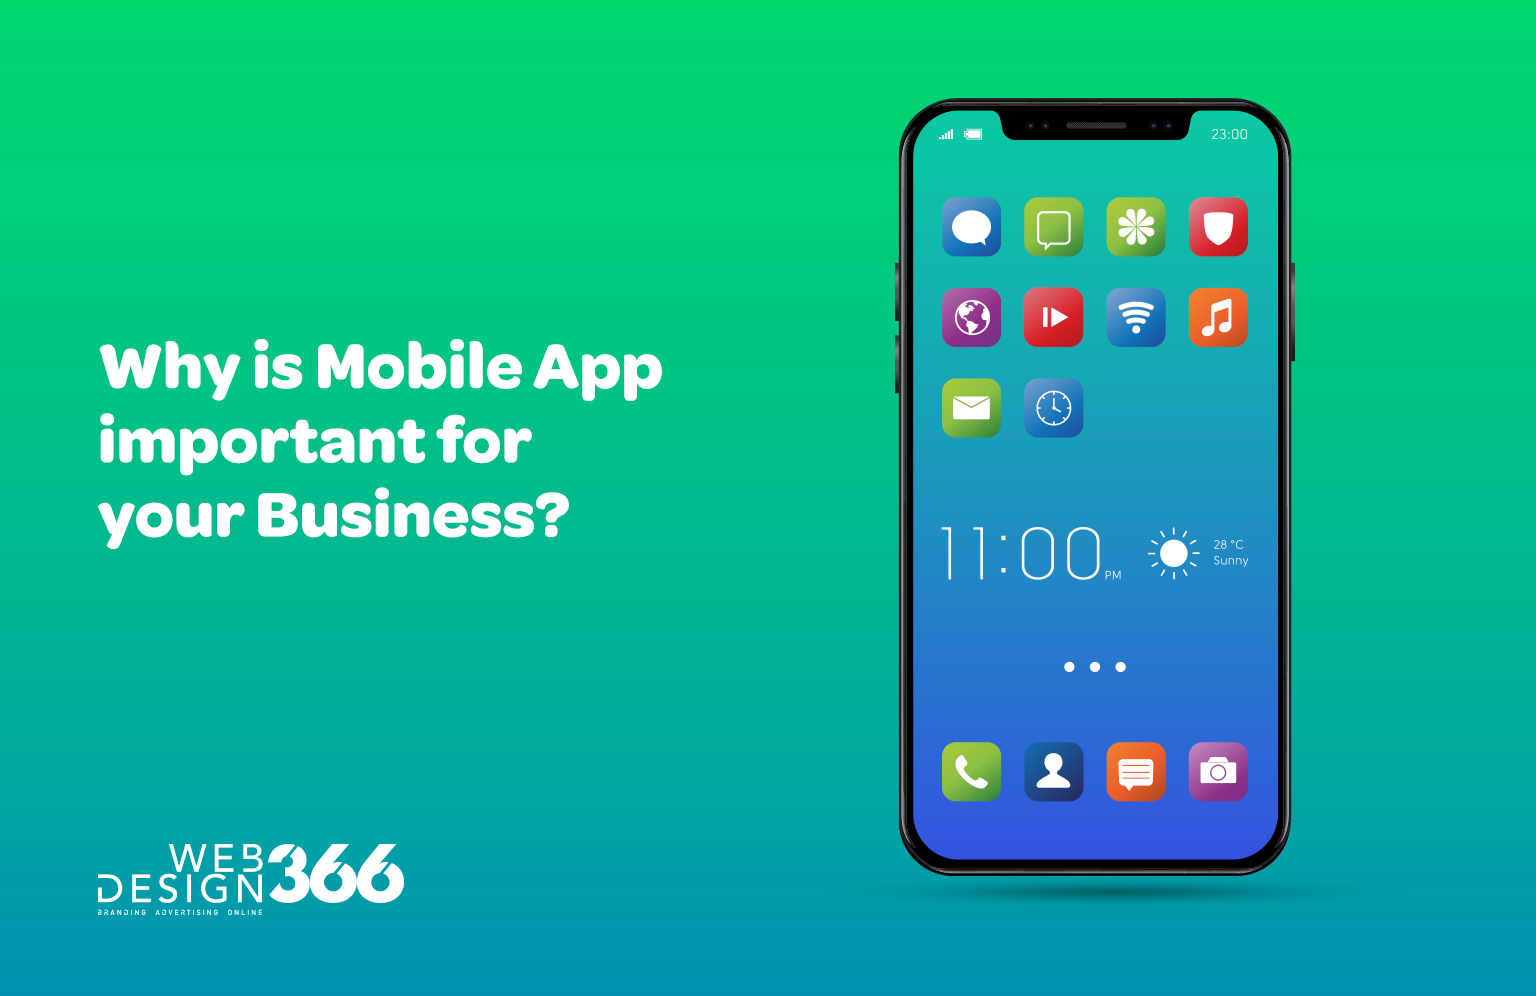 Why is Mobile App important for your Business?